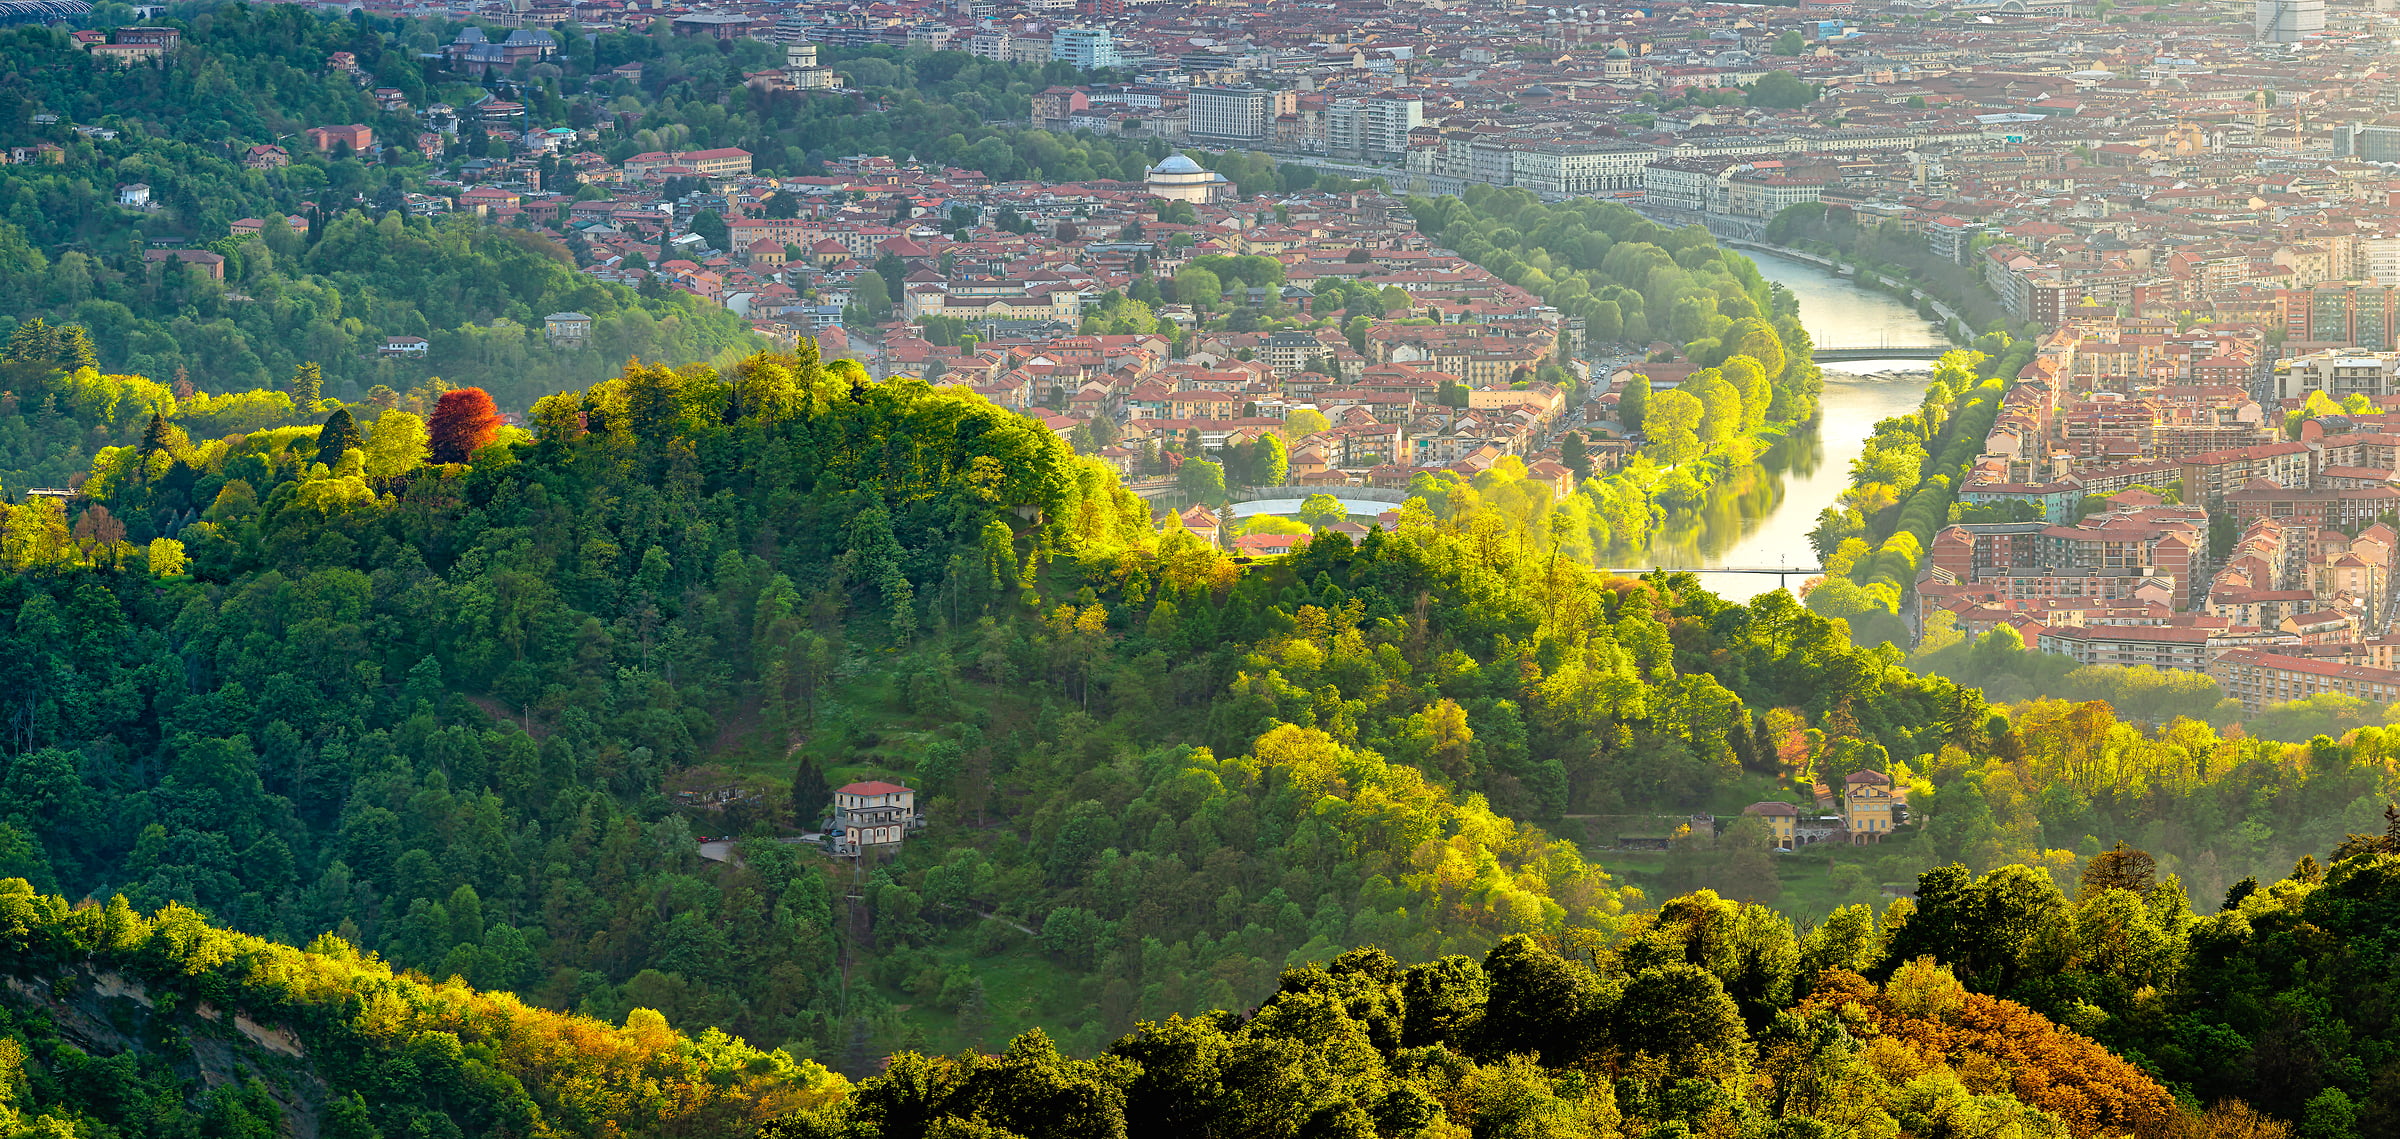 105 megapixels! A very high resolution, large-format VAST photo print of Turin, Italy; city photograph created by Duilio Fiorille in Turin, Piedmont, Italy